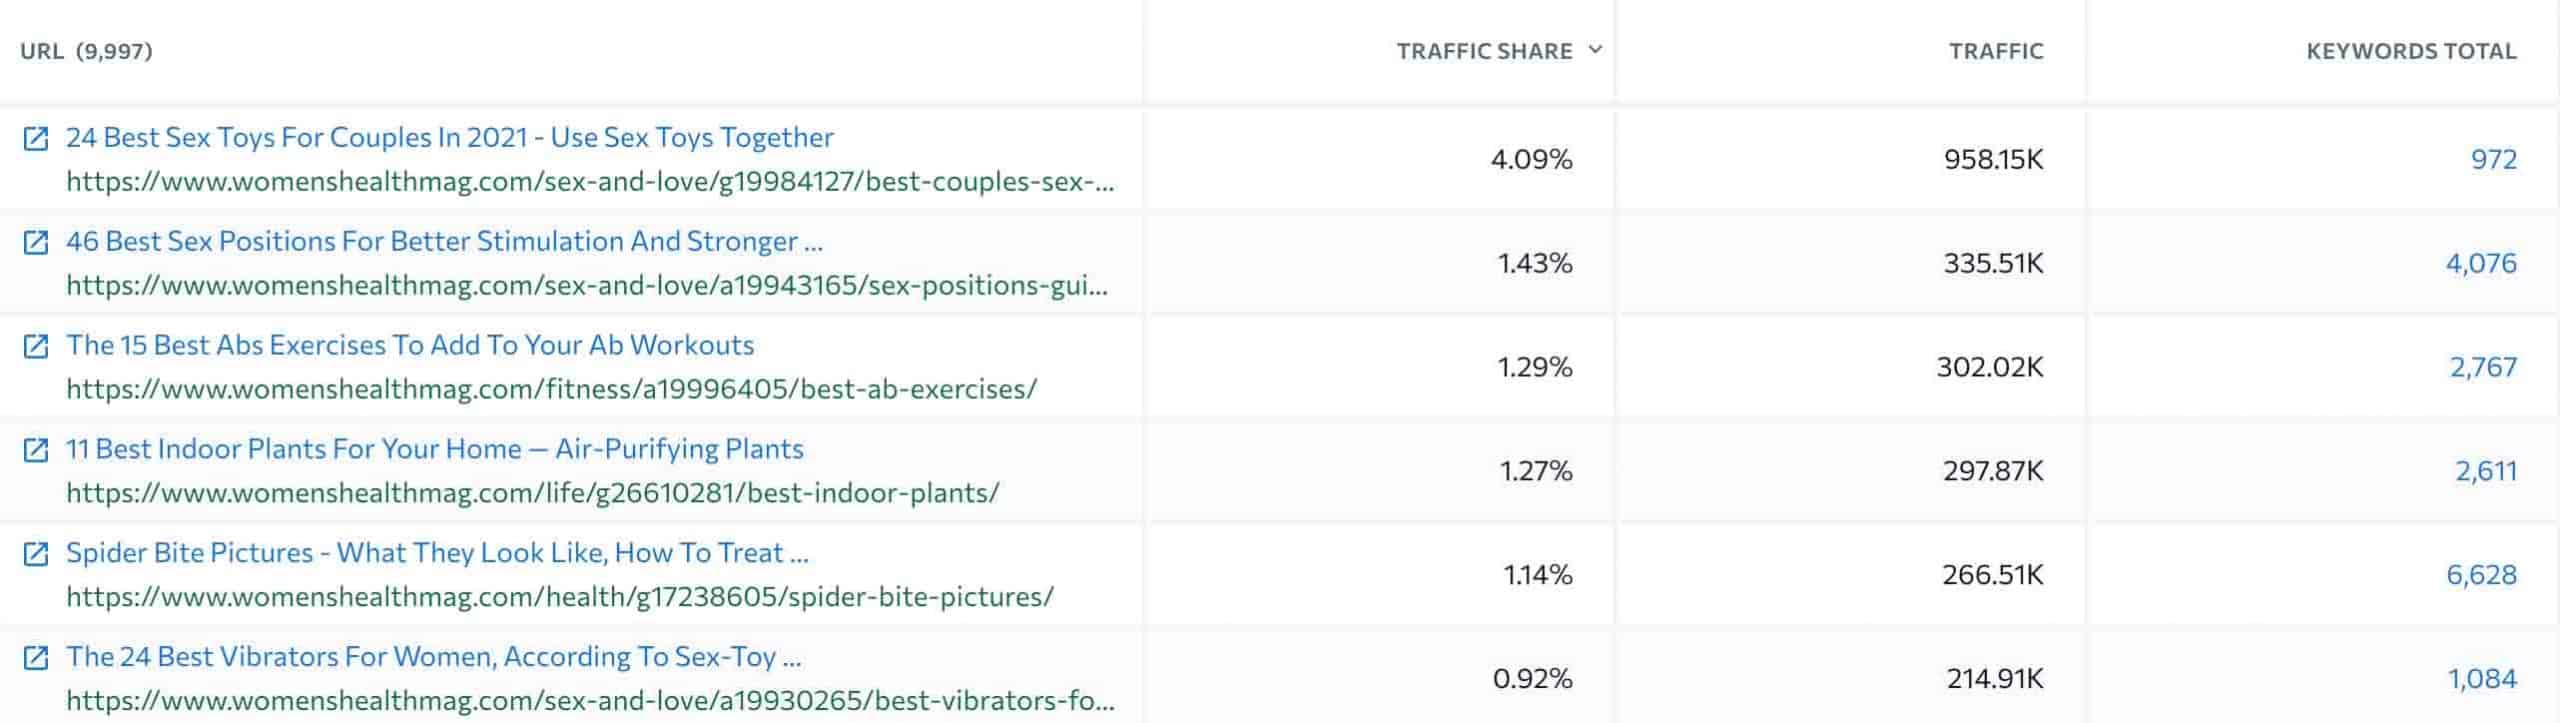 competitors top pages